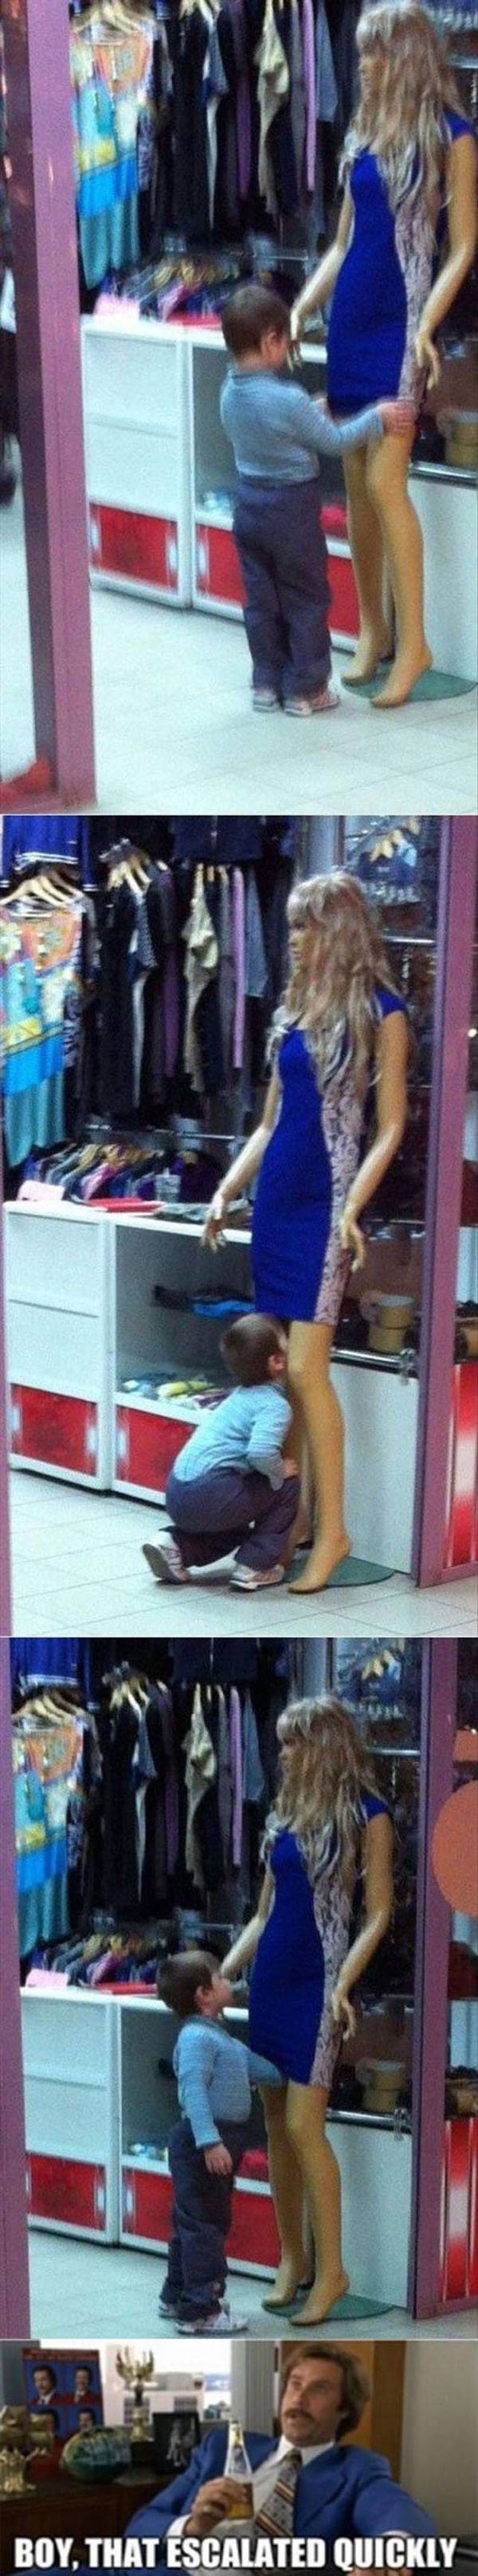 That escalated quickly meme of kid looking up skirt of mannequin